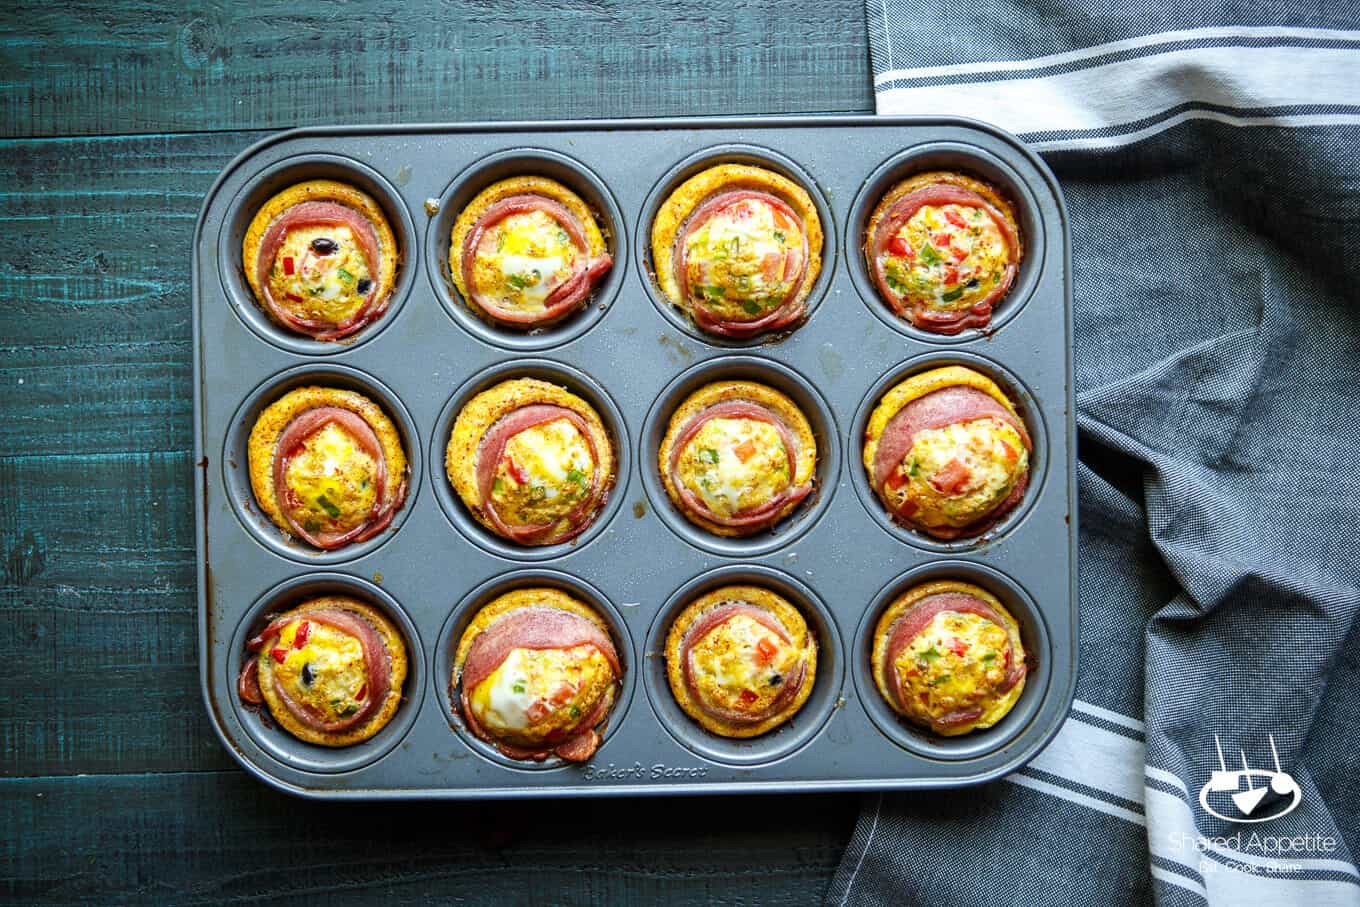 Healthy Turkey Bacon Wrapped Southwest Egg Muffins